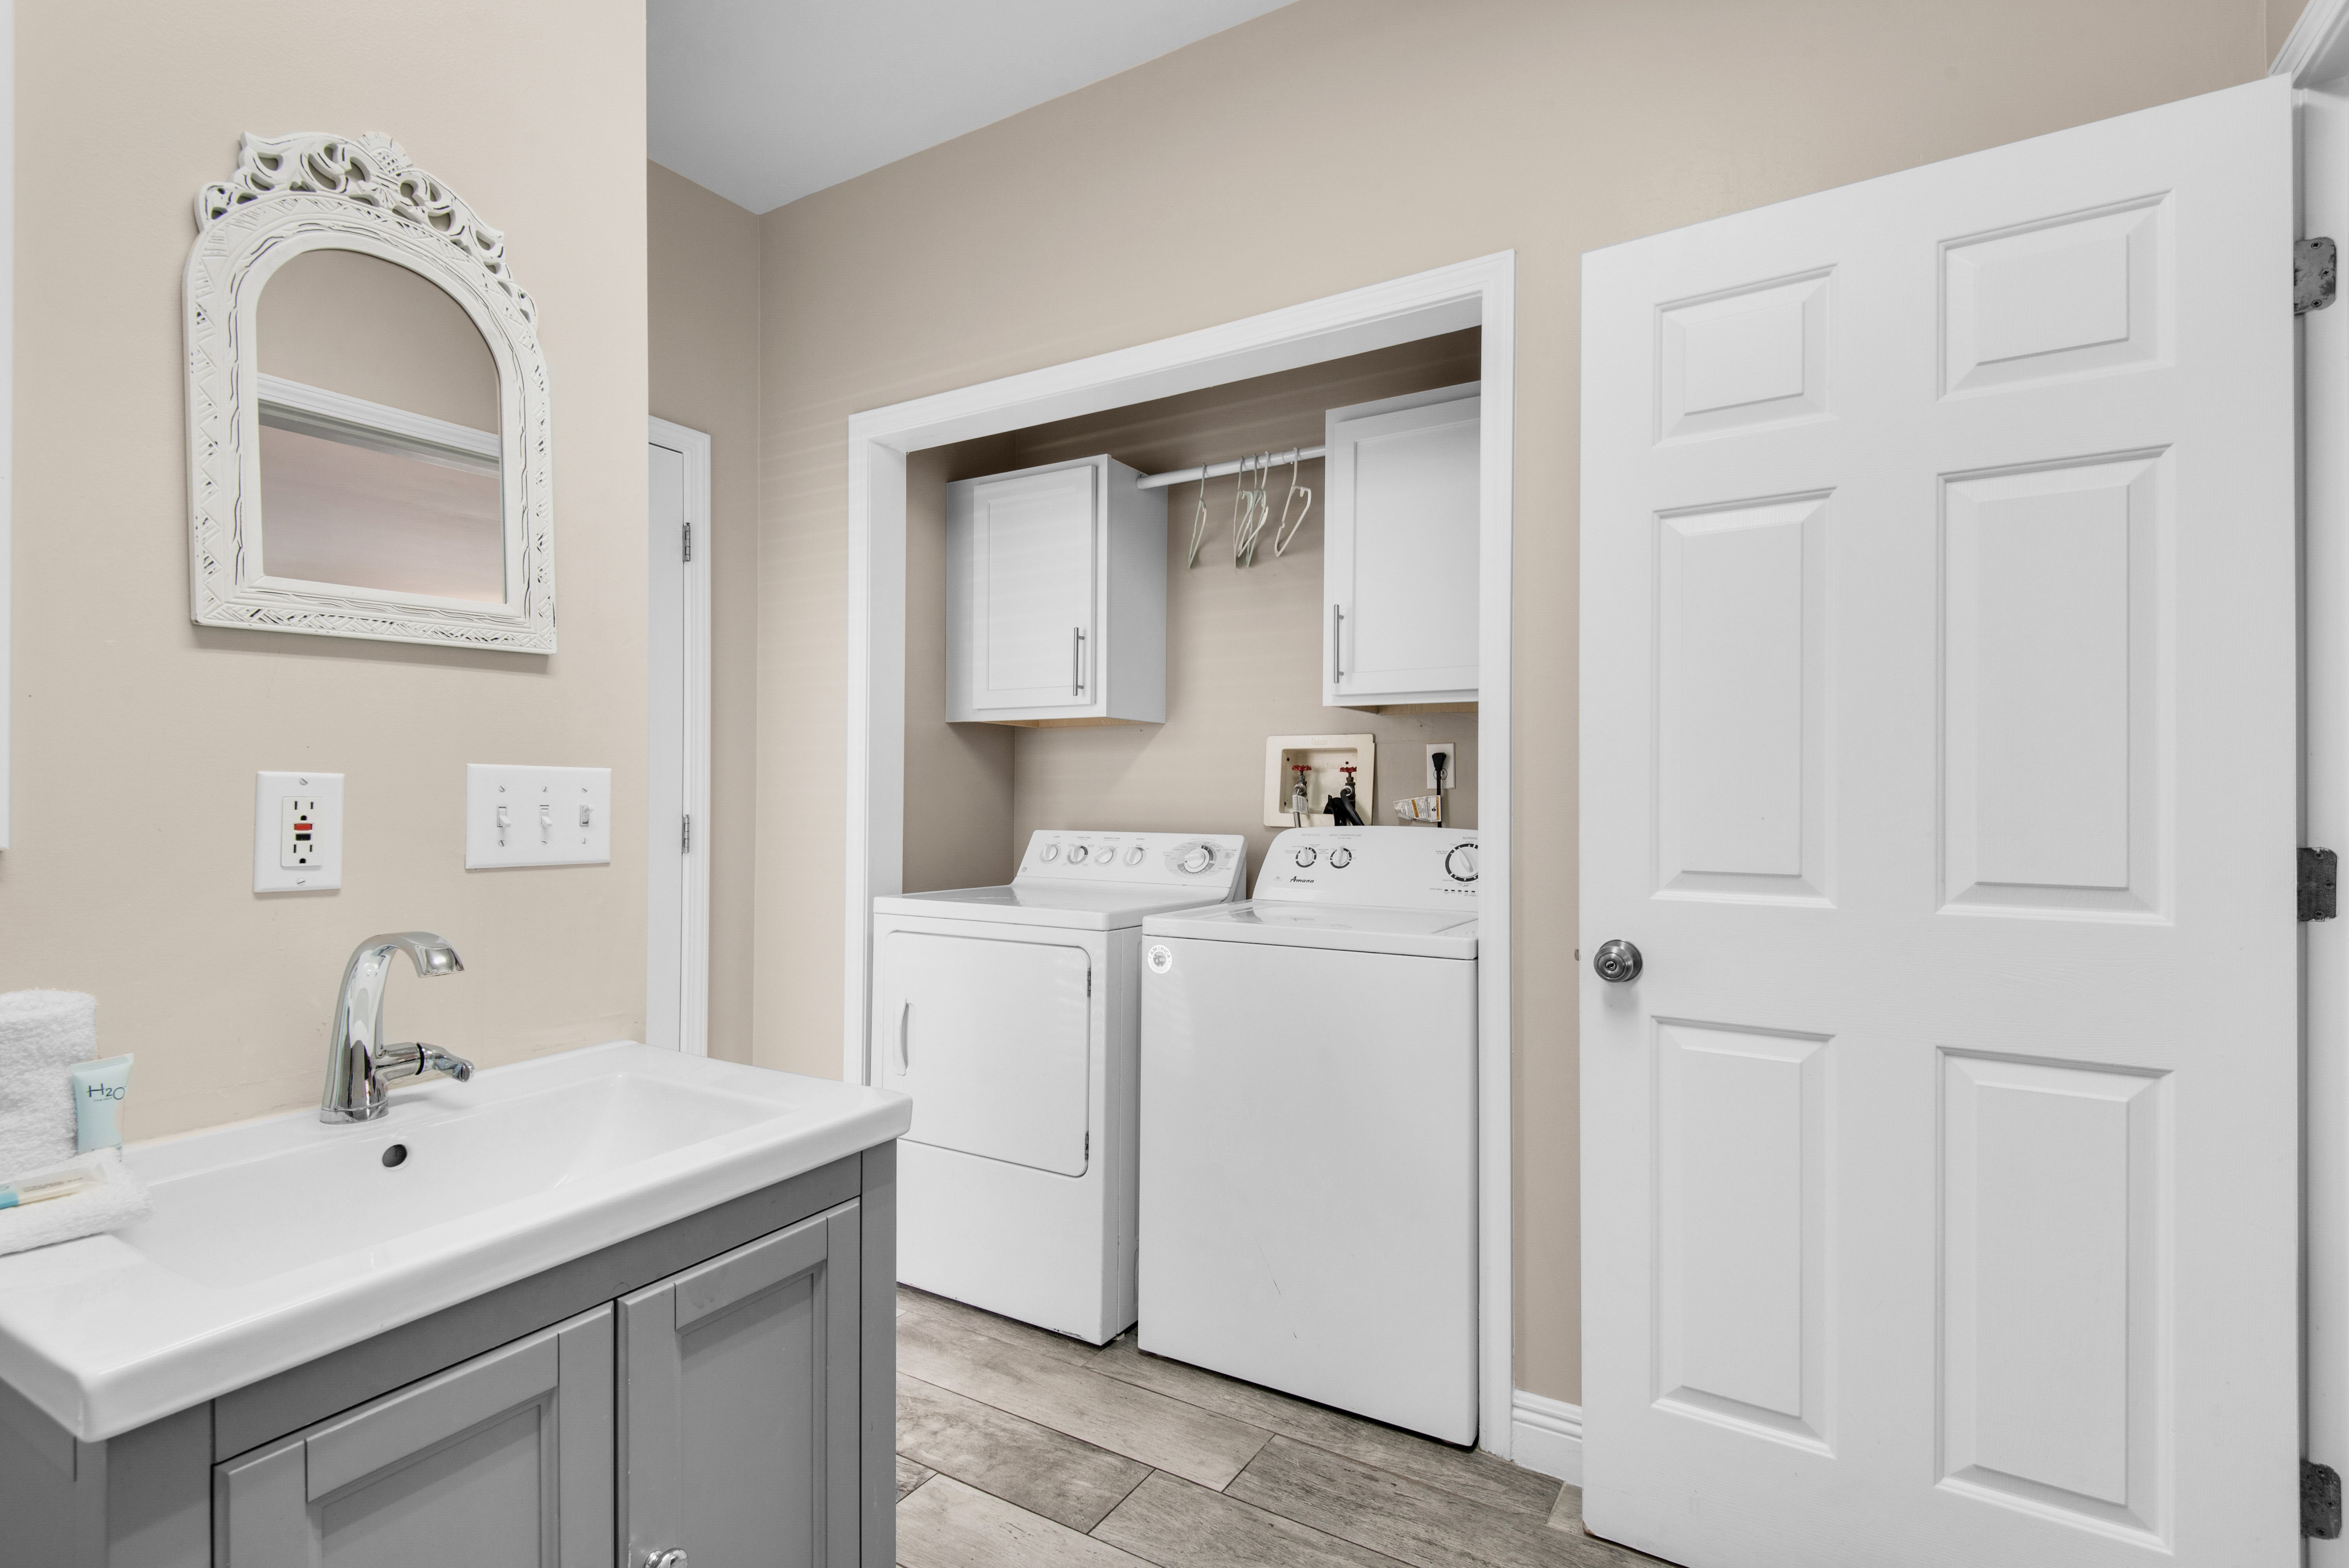 Guest bath with laundry room